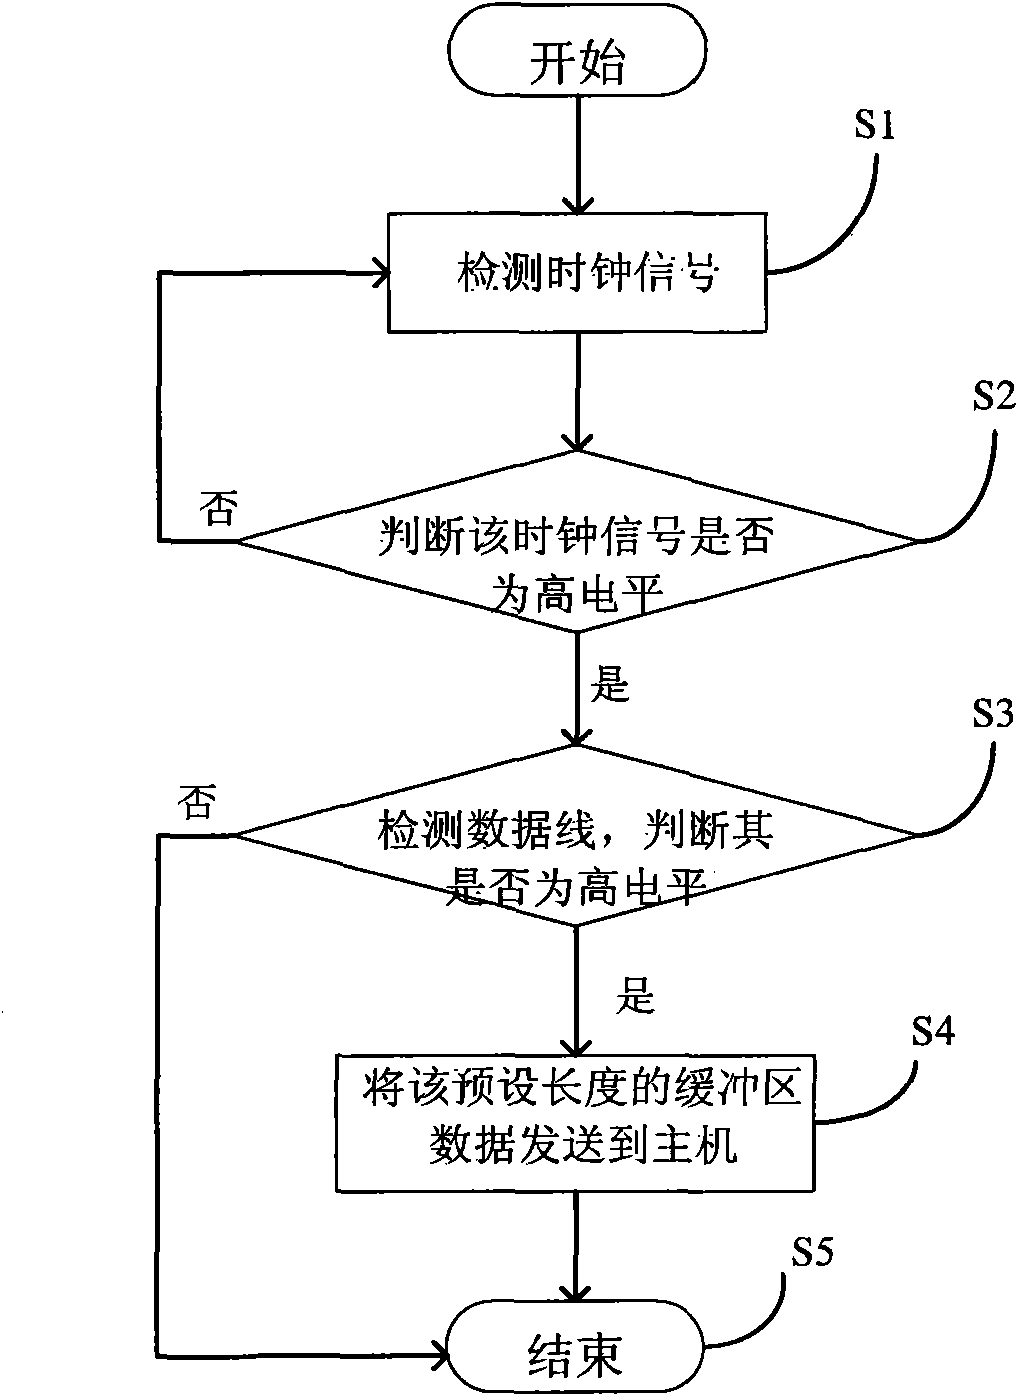 Multi-keyboard input system, input equipment, switching device and control method